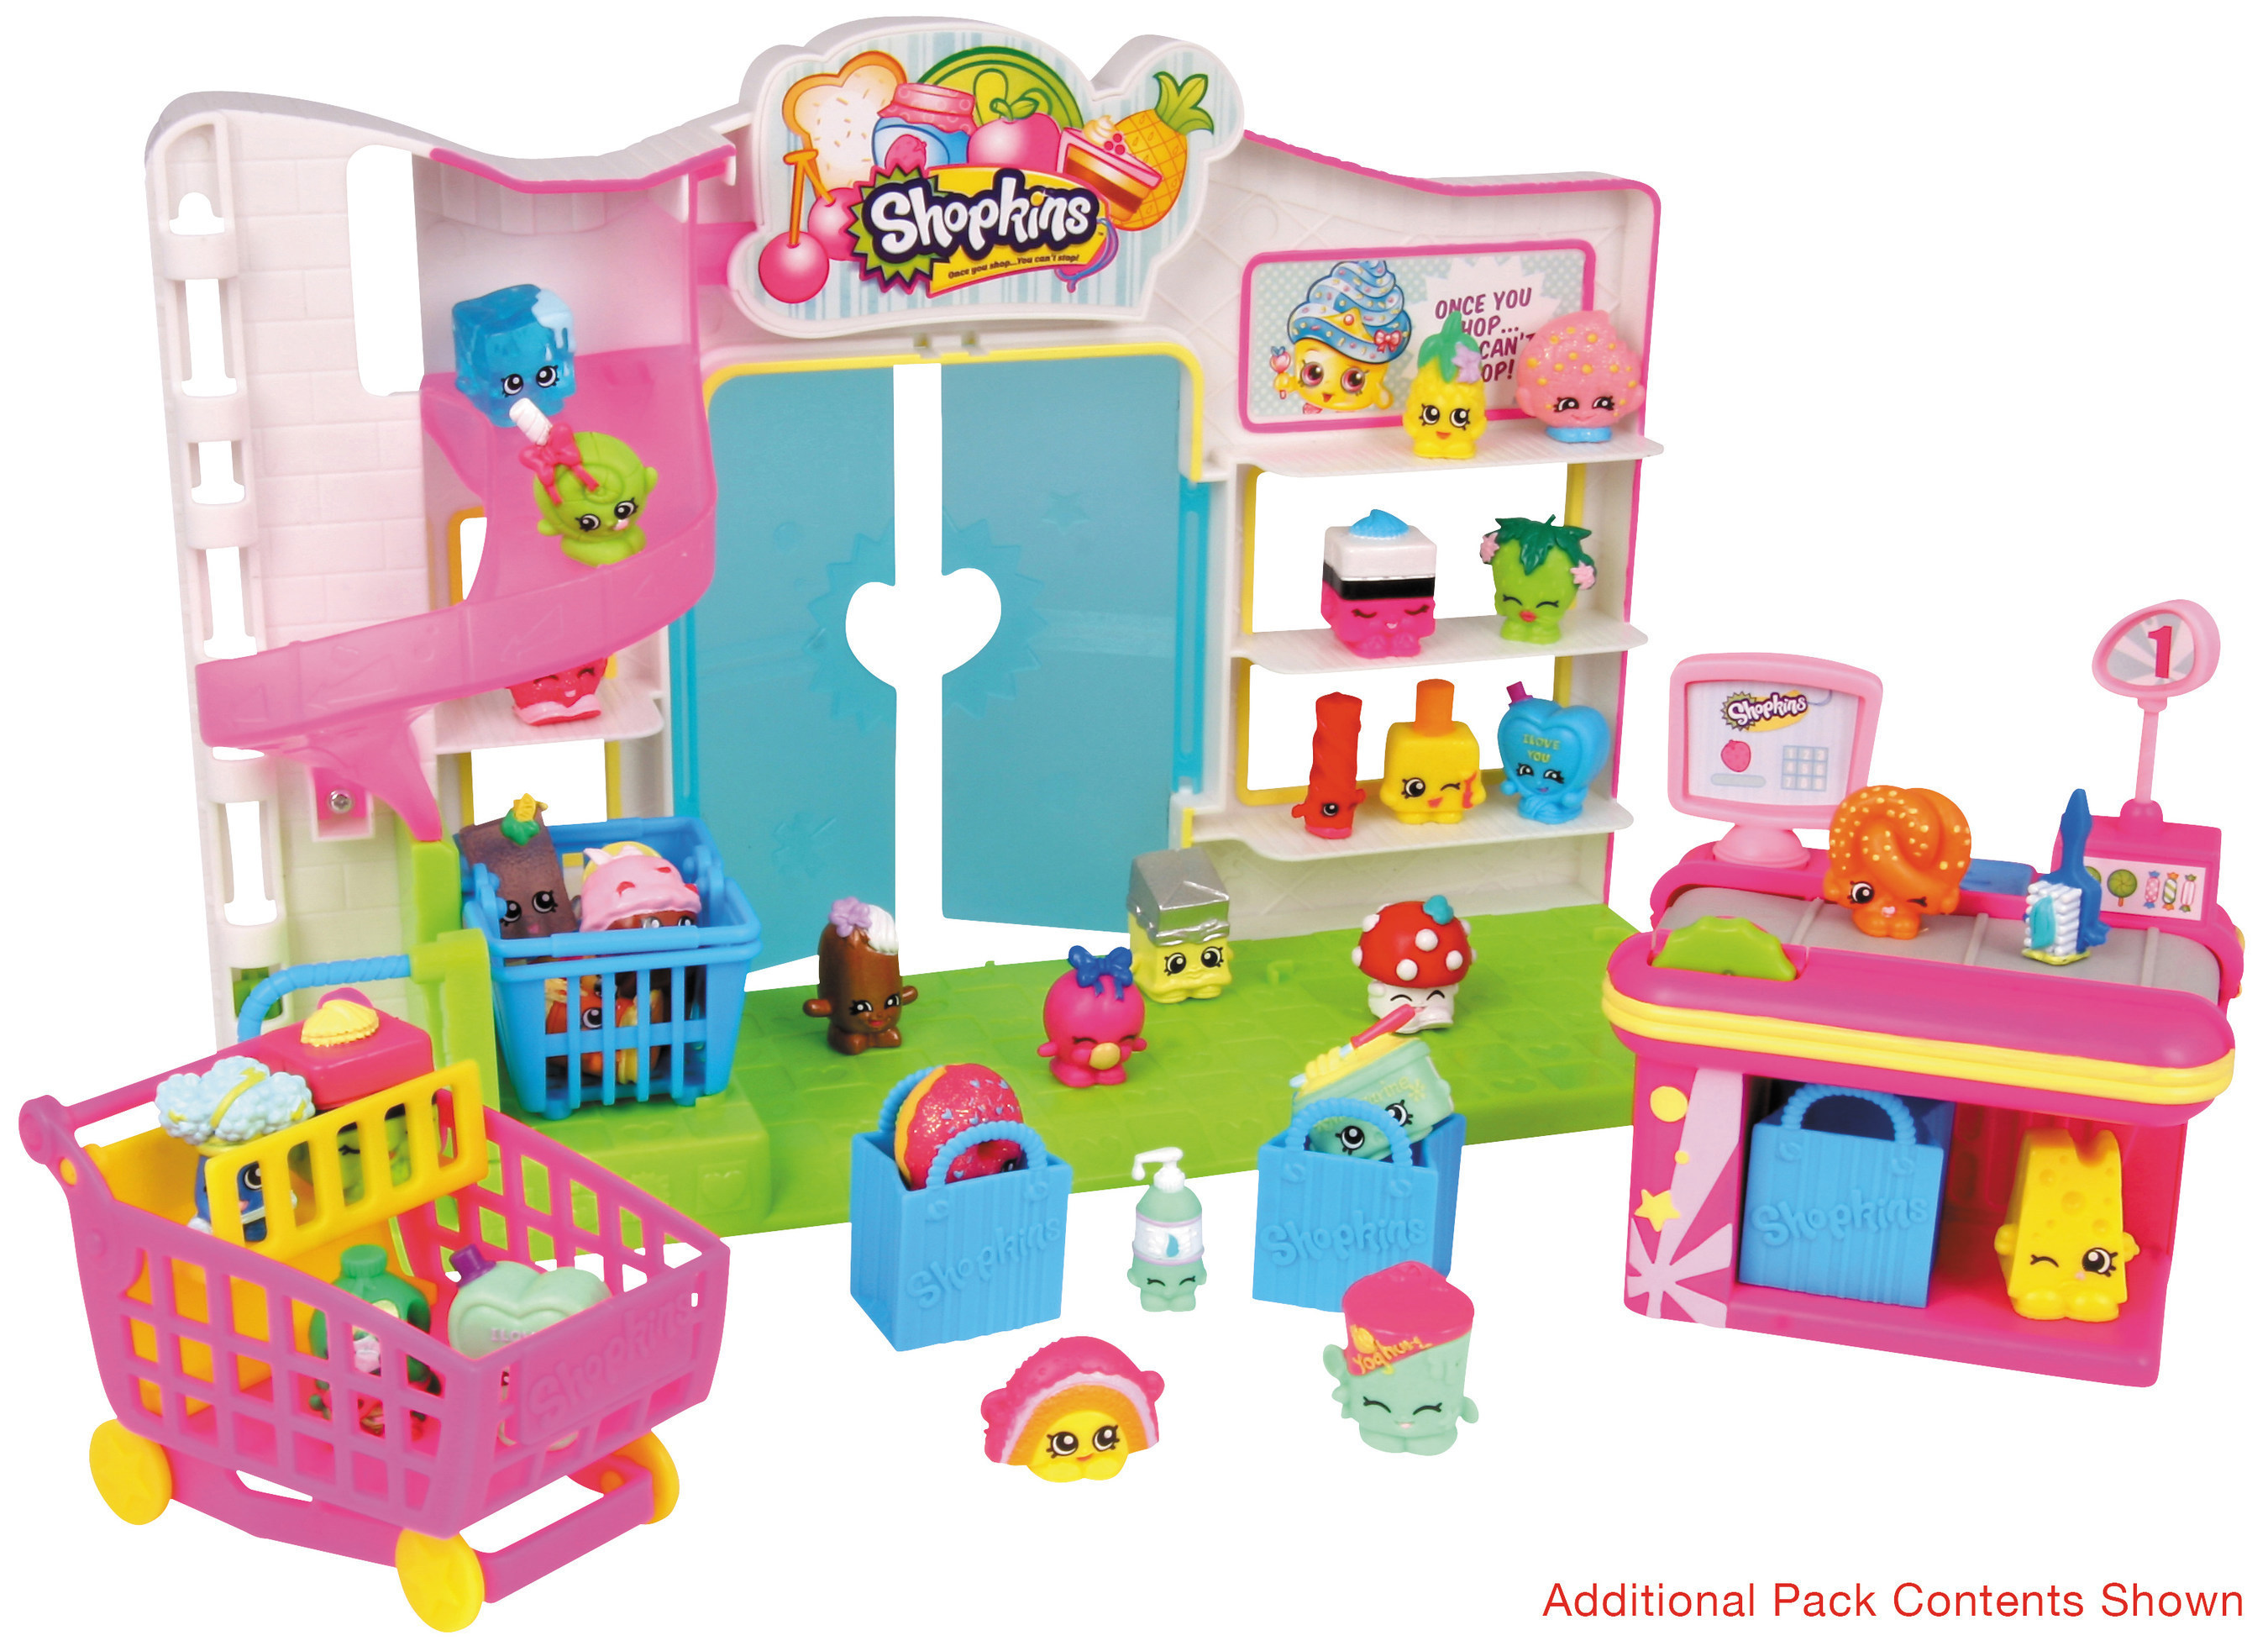 Shopkins Small Mart is named a 2015 Toy of the Year finalist by the Toy Industry Association. To meet high demand, Moose Toys is flying in additional stock for the holidays.